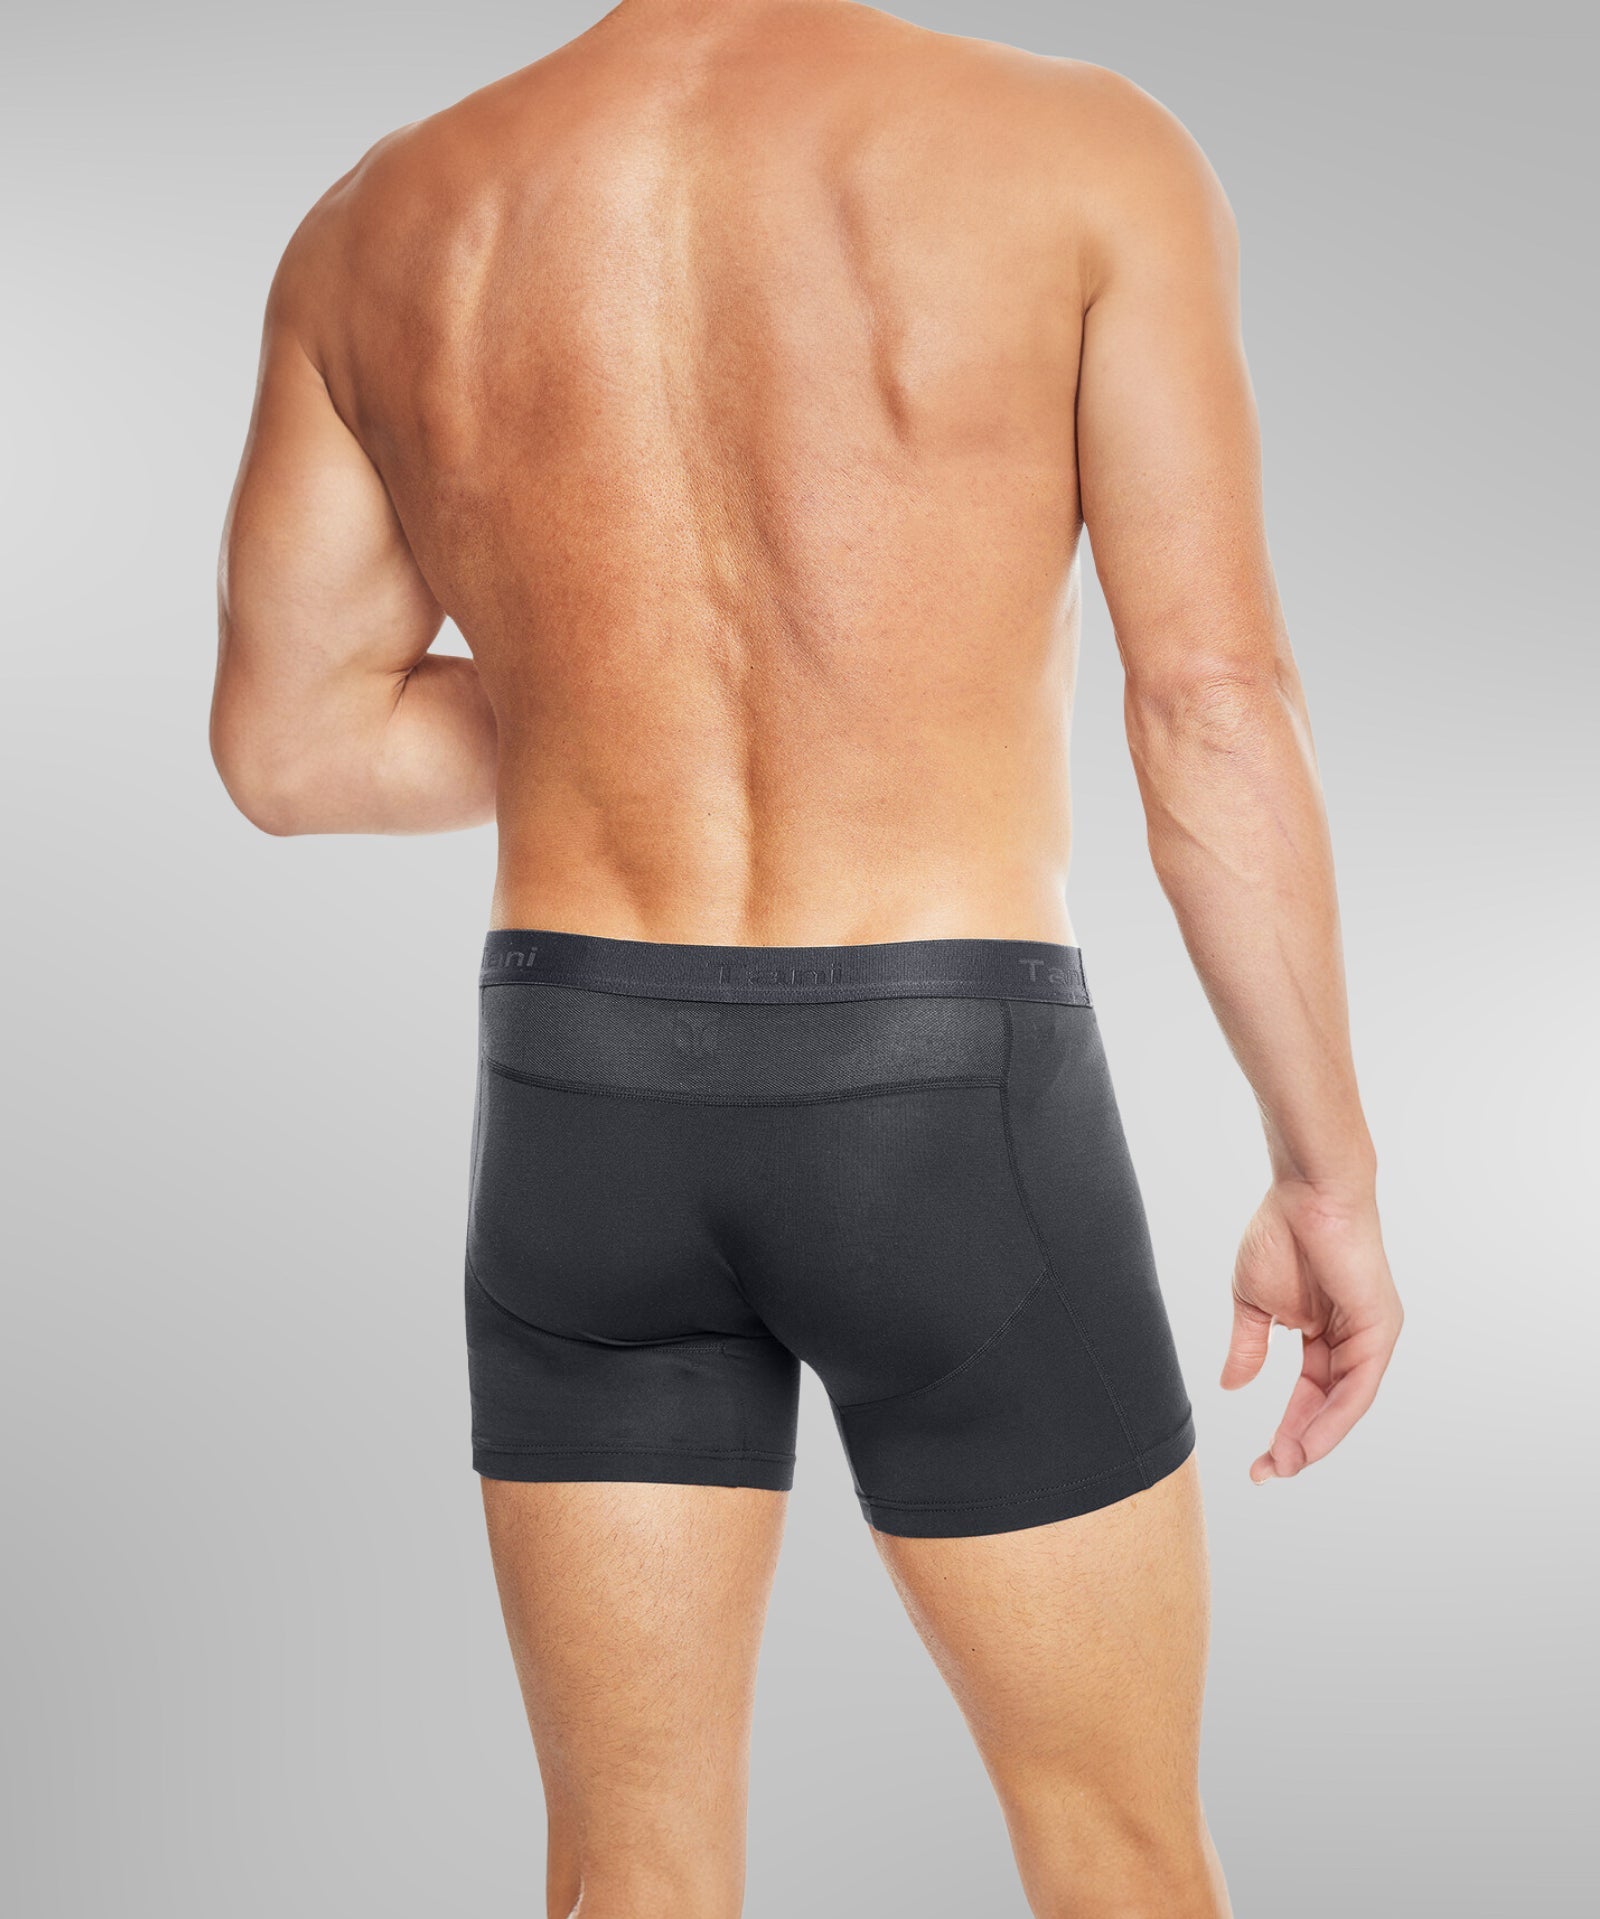 Man Wearing a Boxer Brief with Horizontal Fly